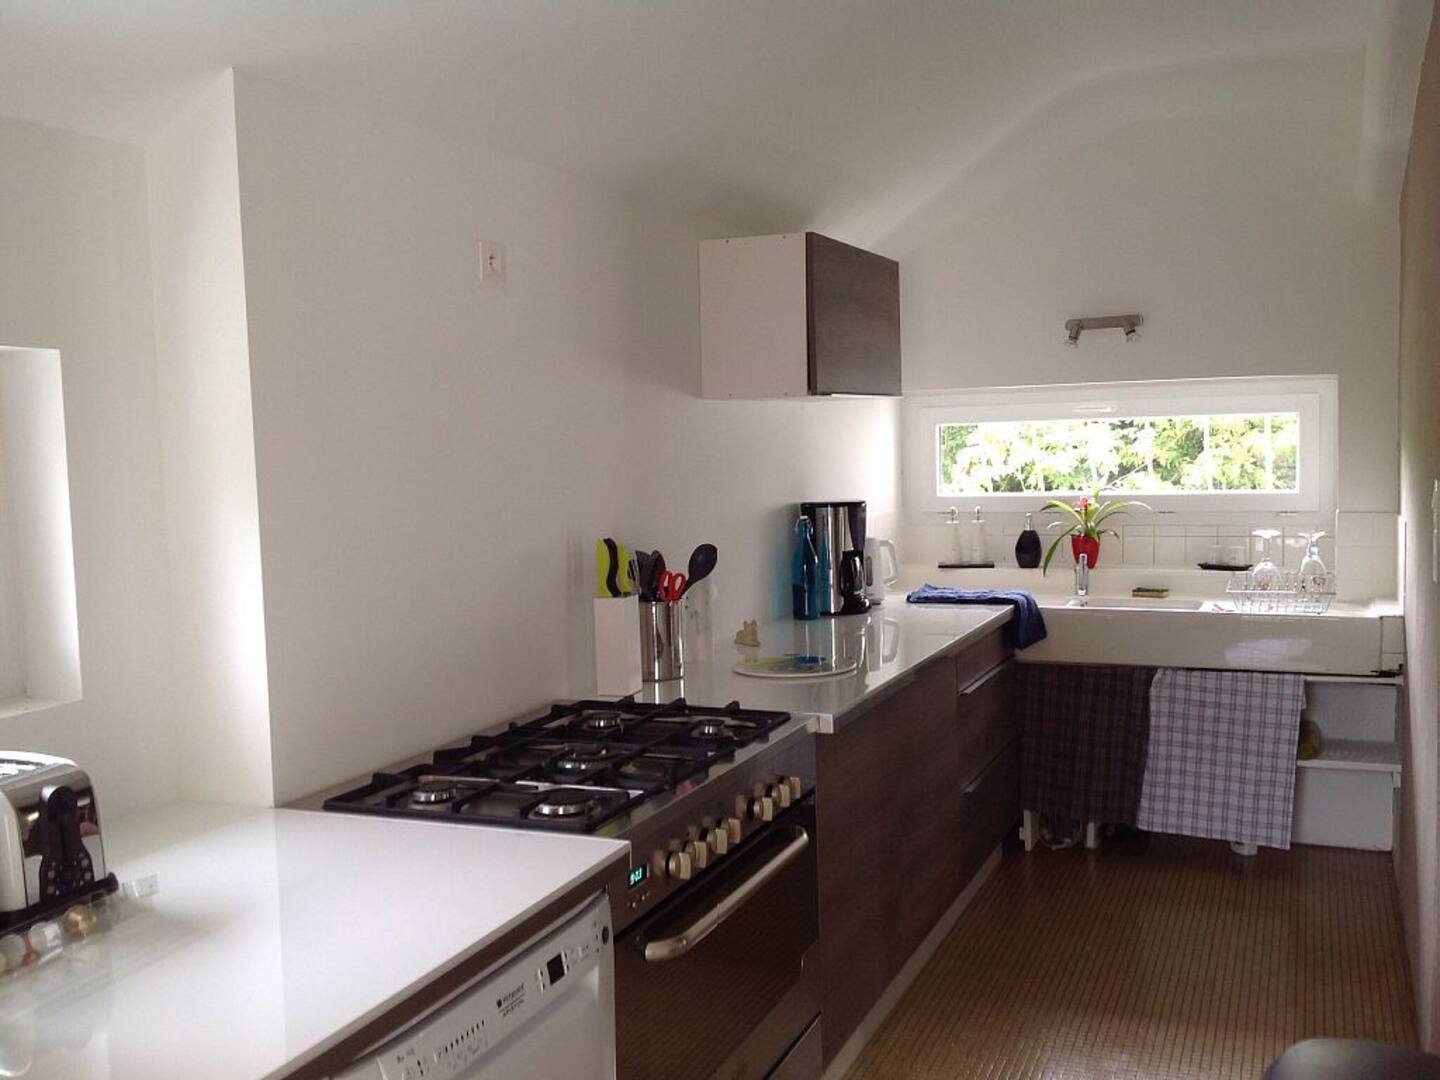 Kitchen equipped with everything necessary to accommodate a group of 25 people, cooking range and 2 fridges